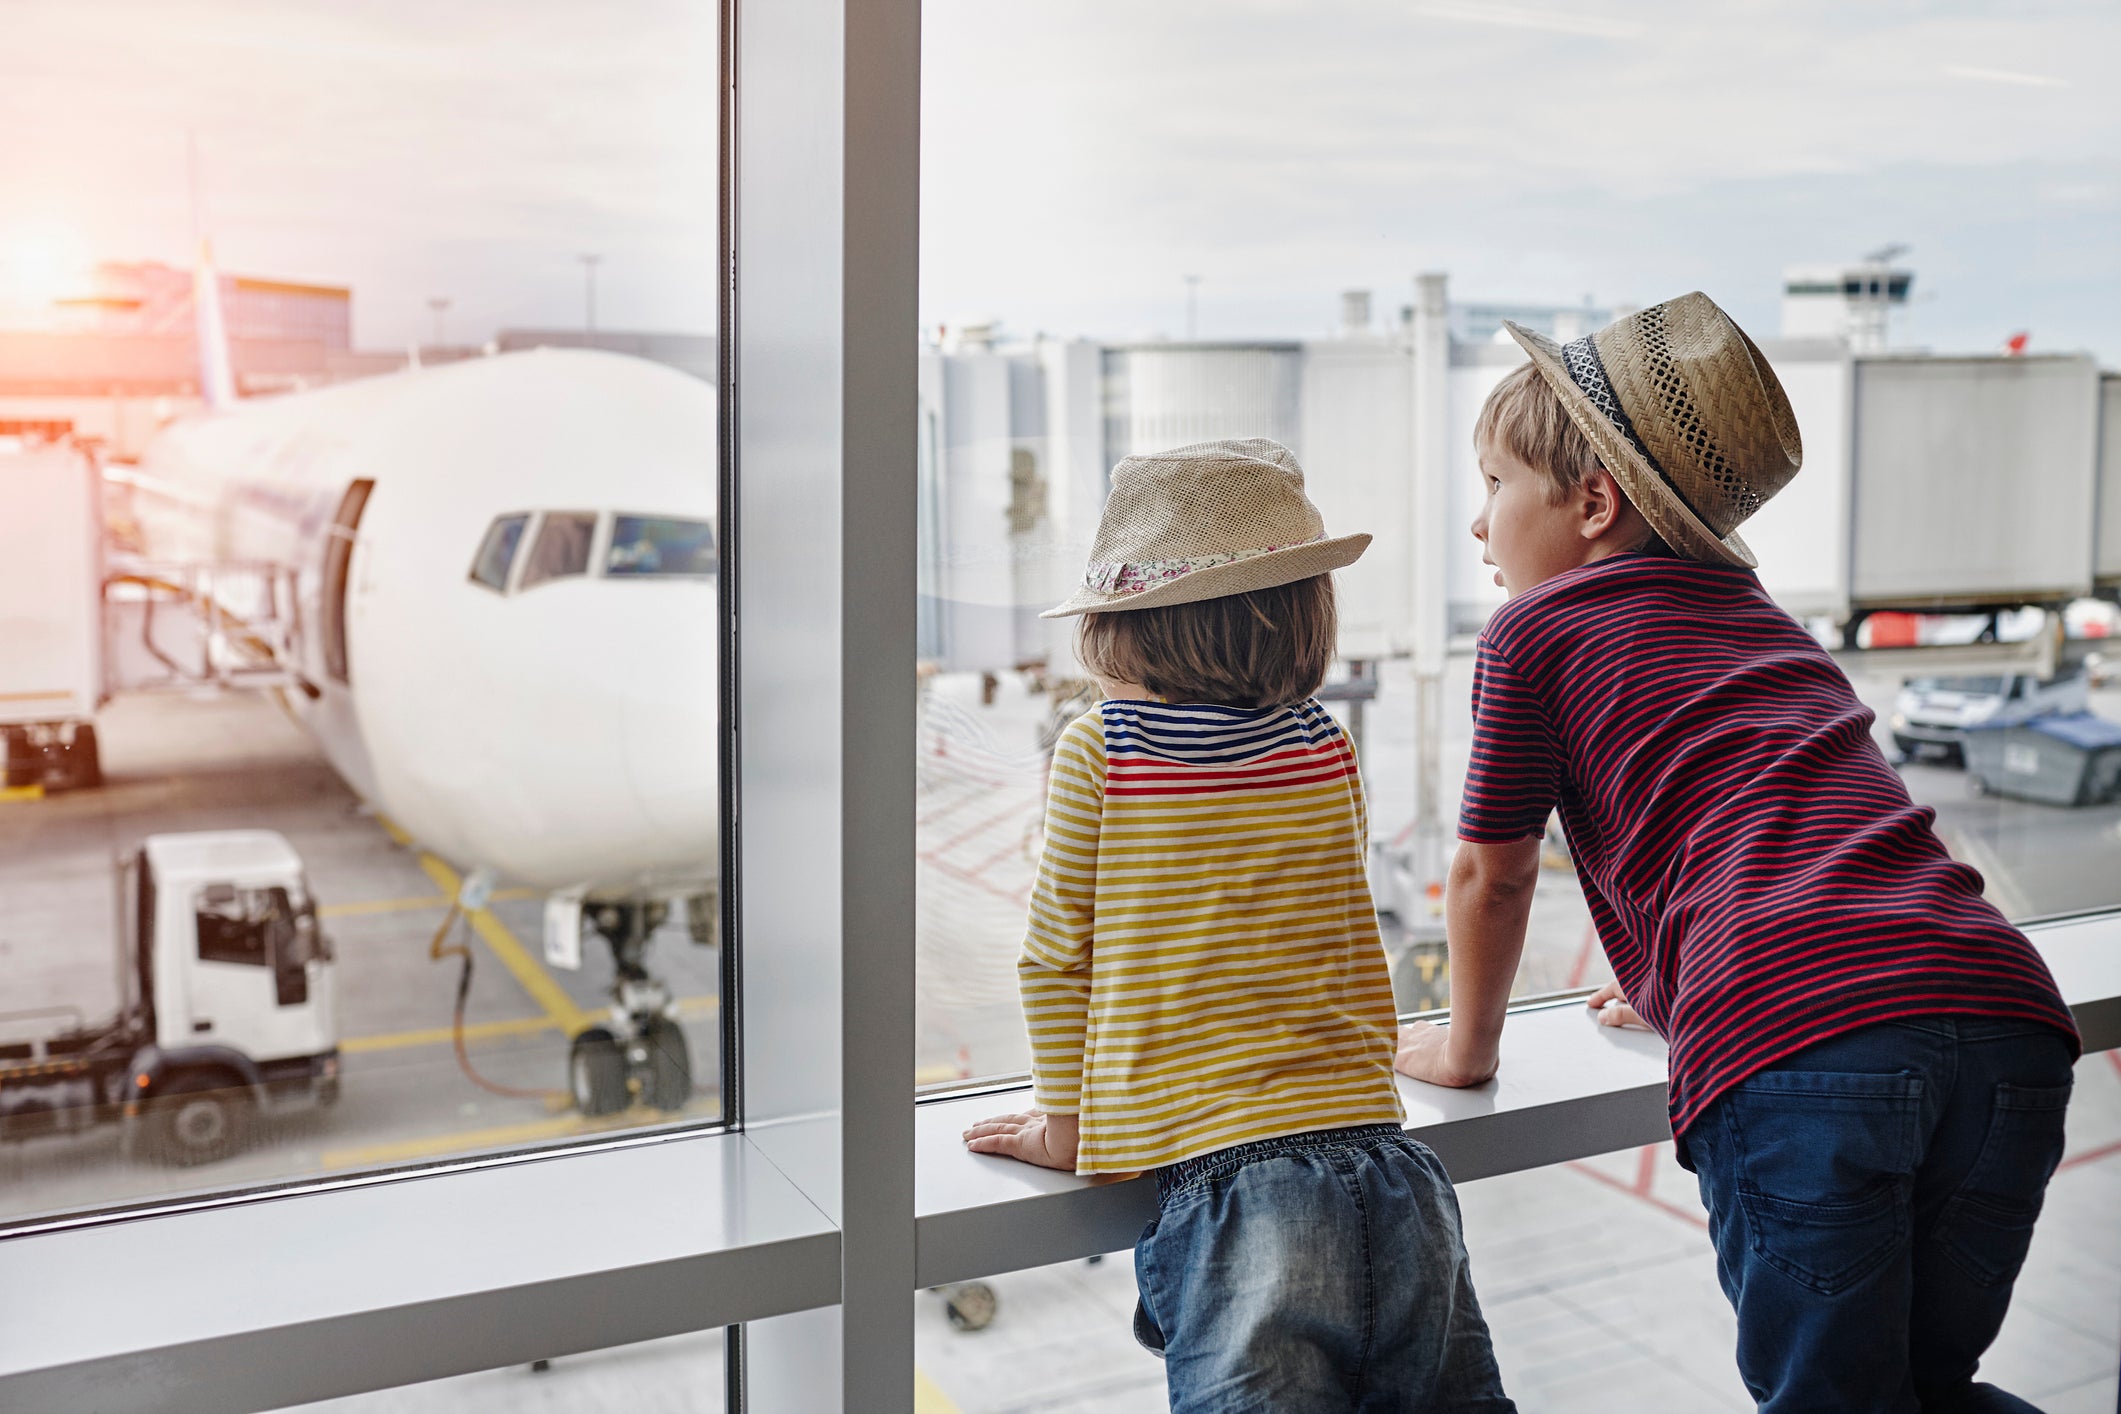 25 airlines that allow families to pool miles